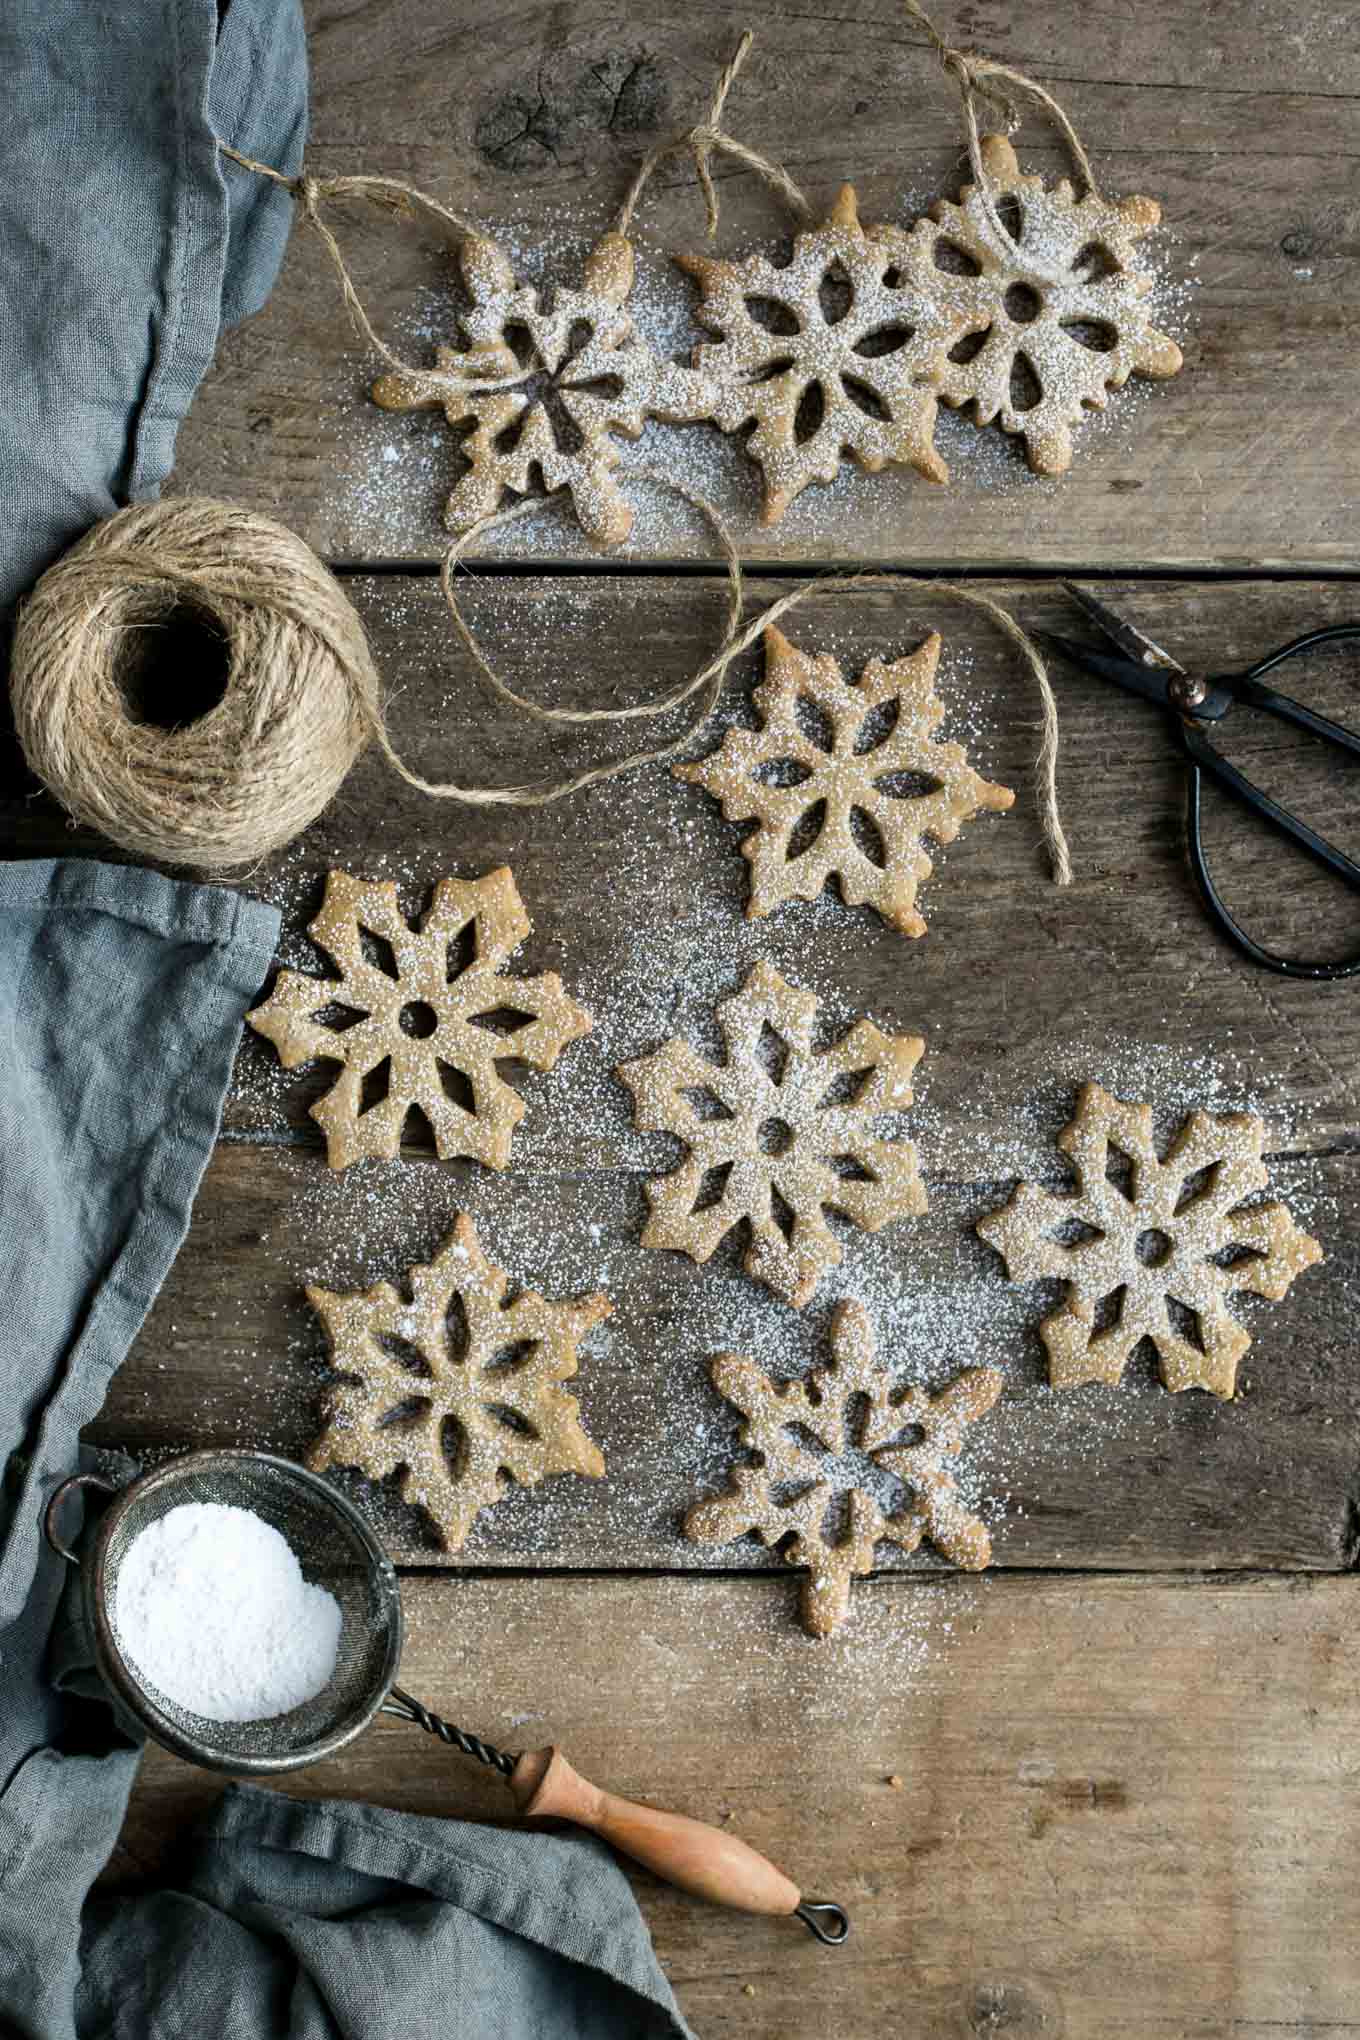 Cinnamon & maple snowflake cookies. These melt-in-your-mouth cookies can also be used to decorate your Christmas tree! #cookies #vegan #Christmas | via @annabanana.co